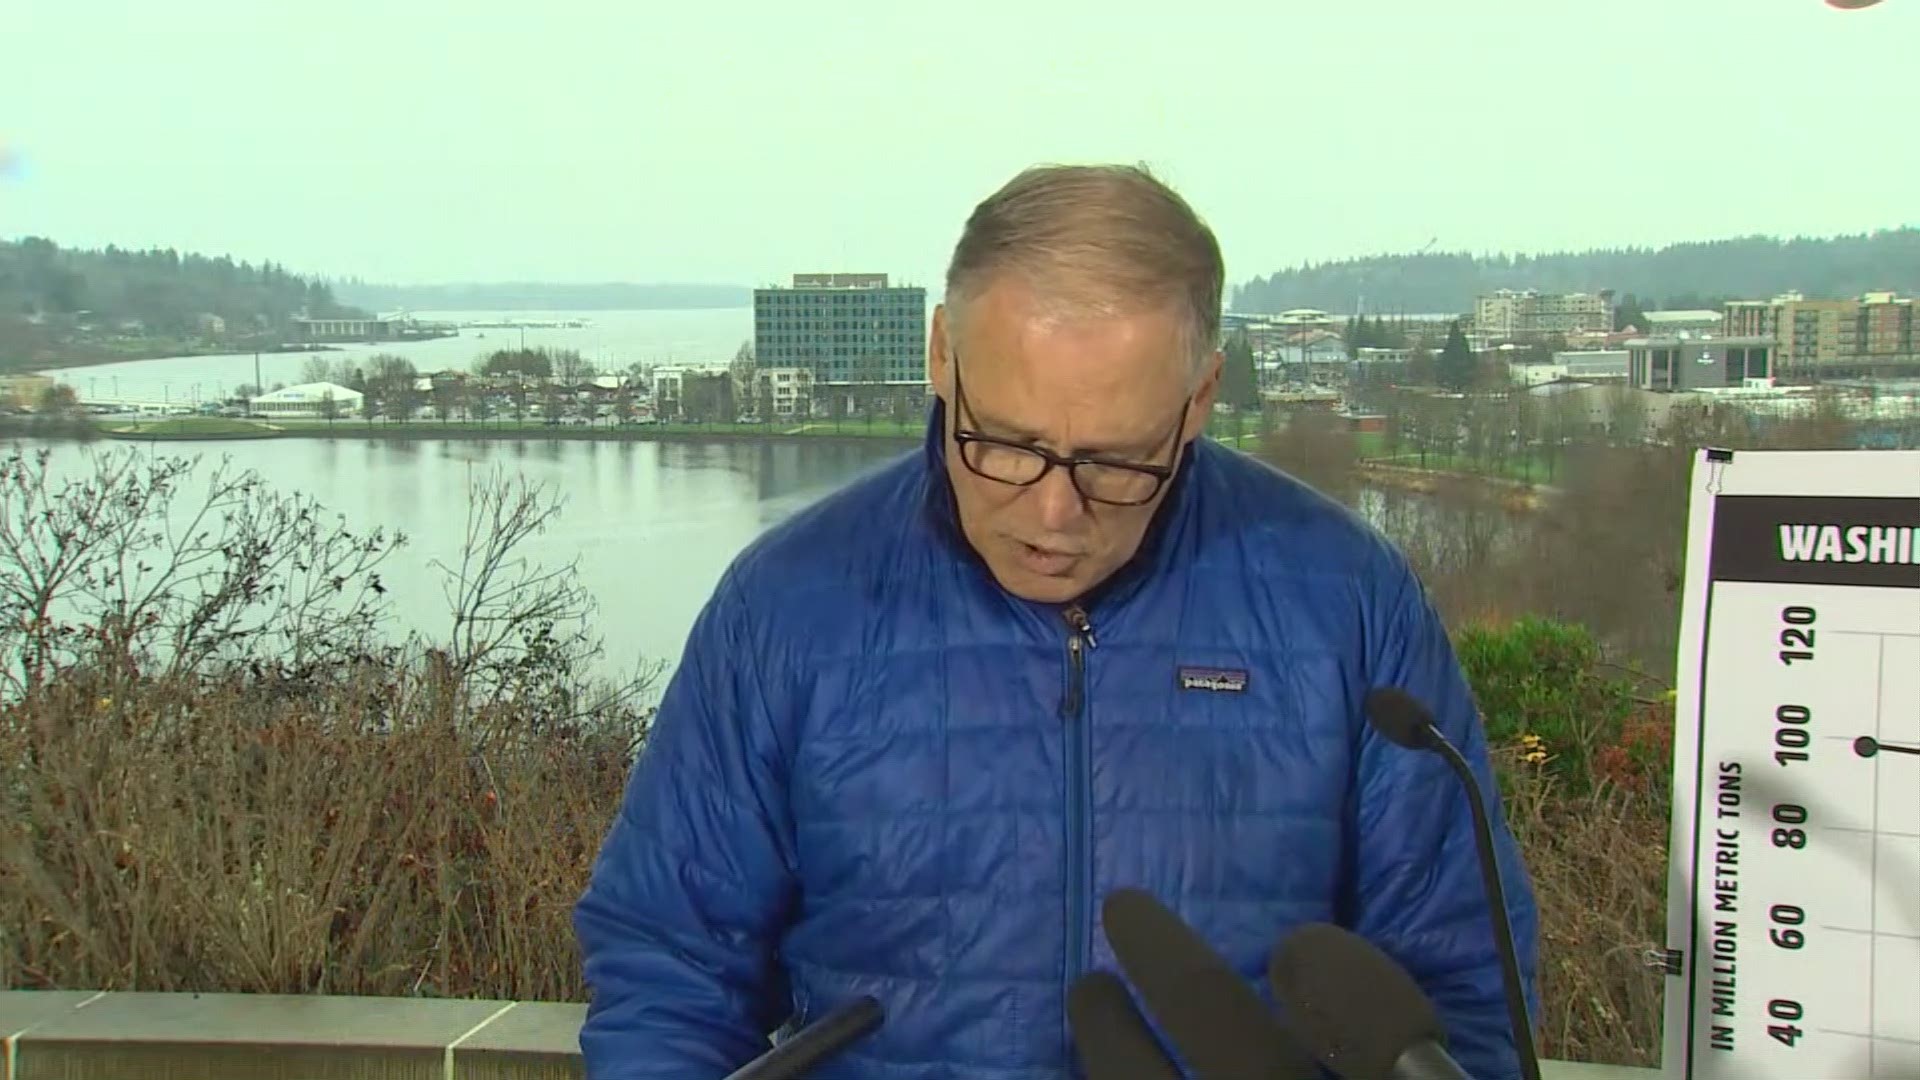 Gov. Jay Inslee announced several new climate change policies he wants the Legislature to address in 2020.